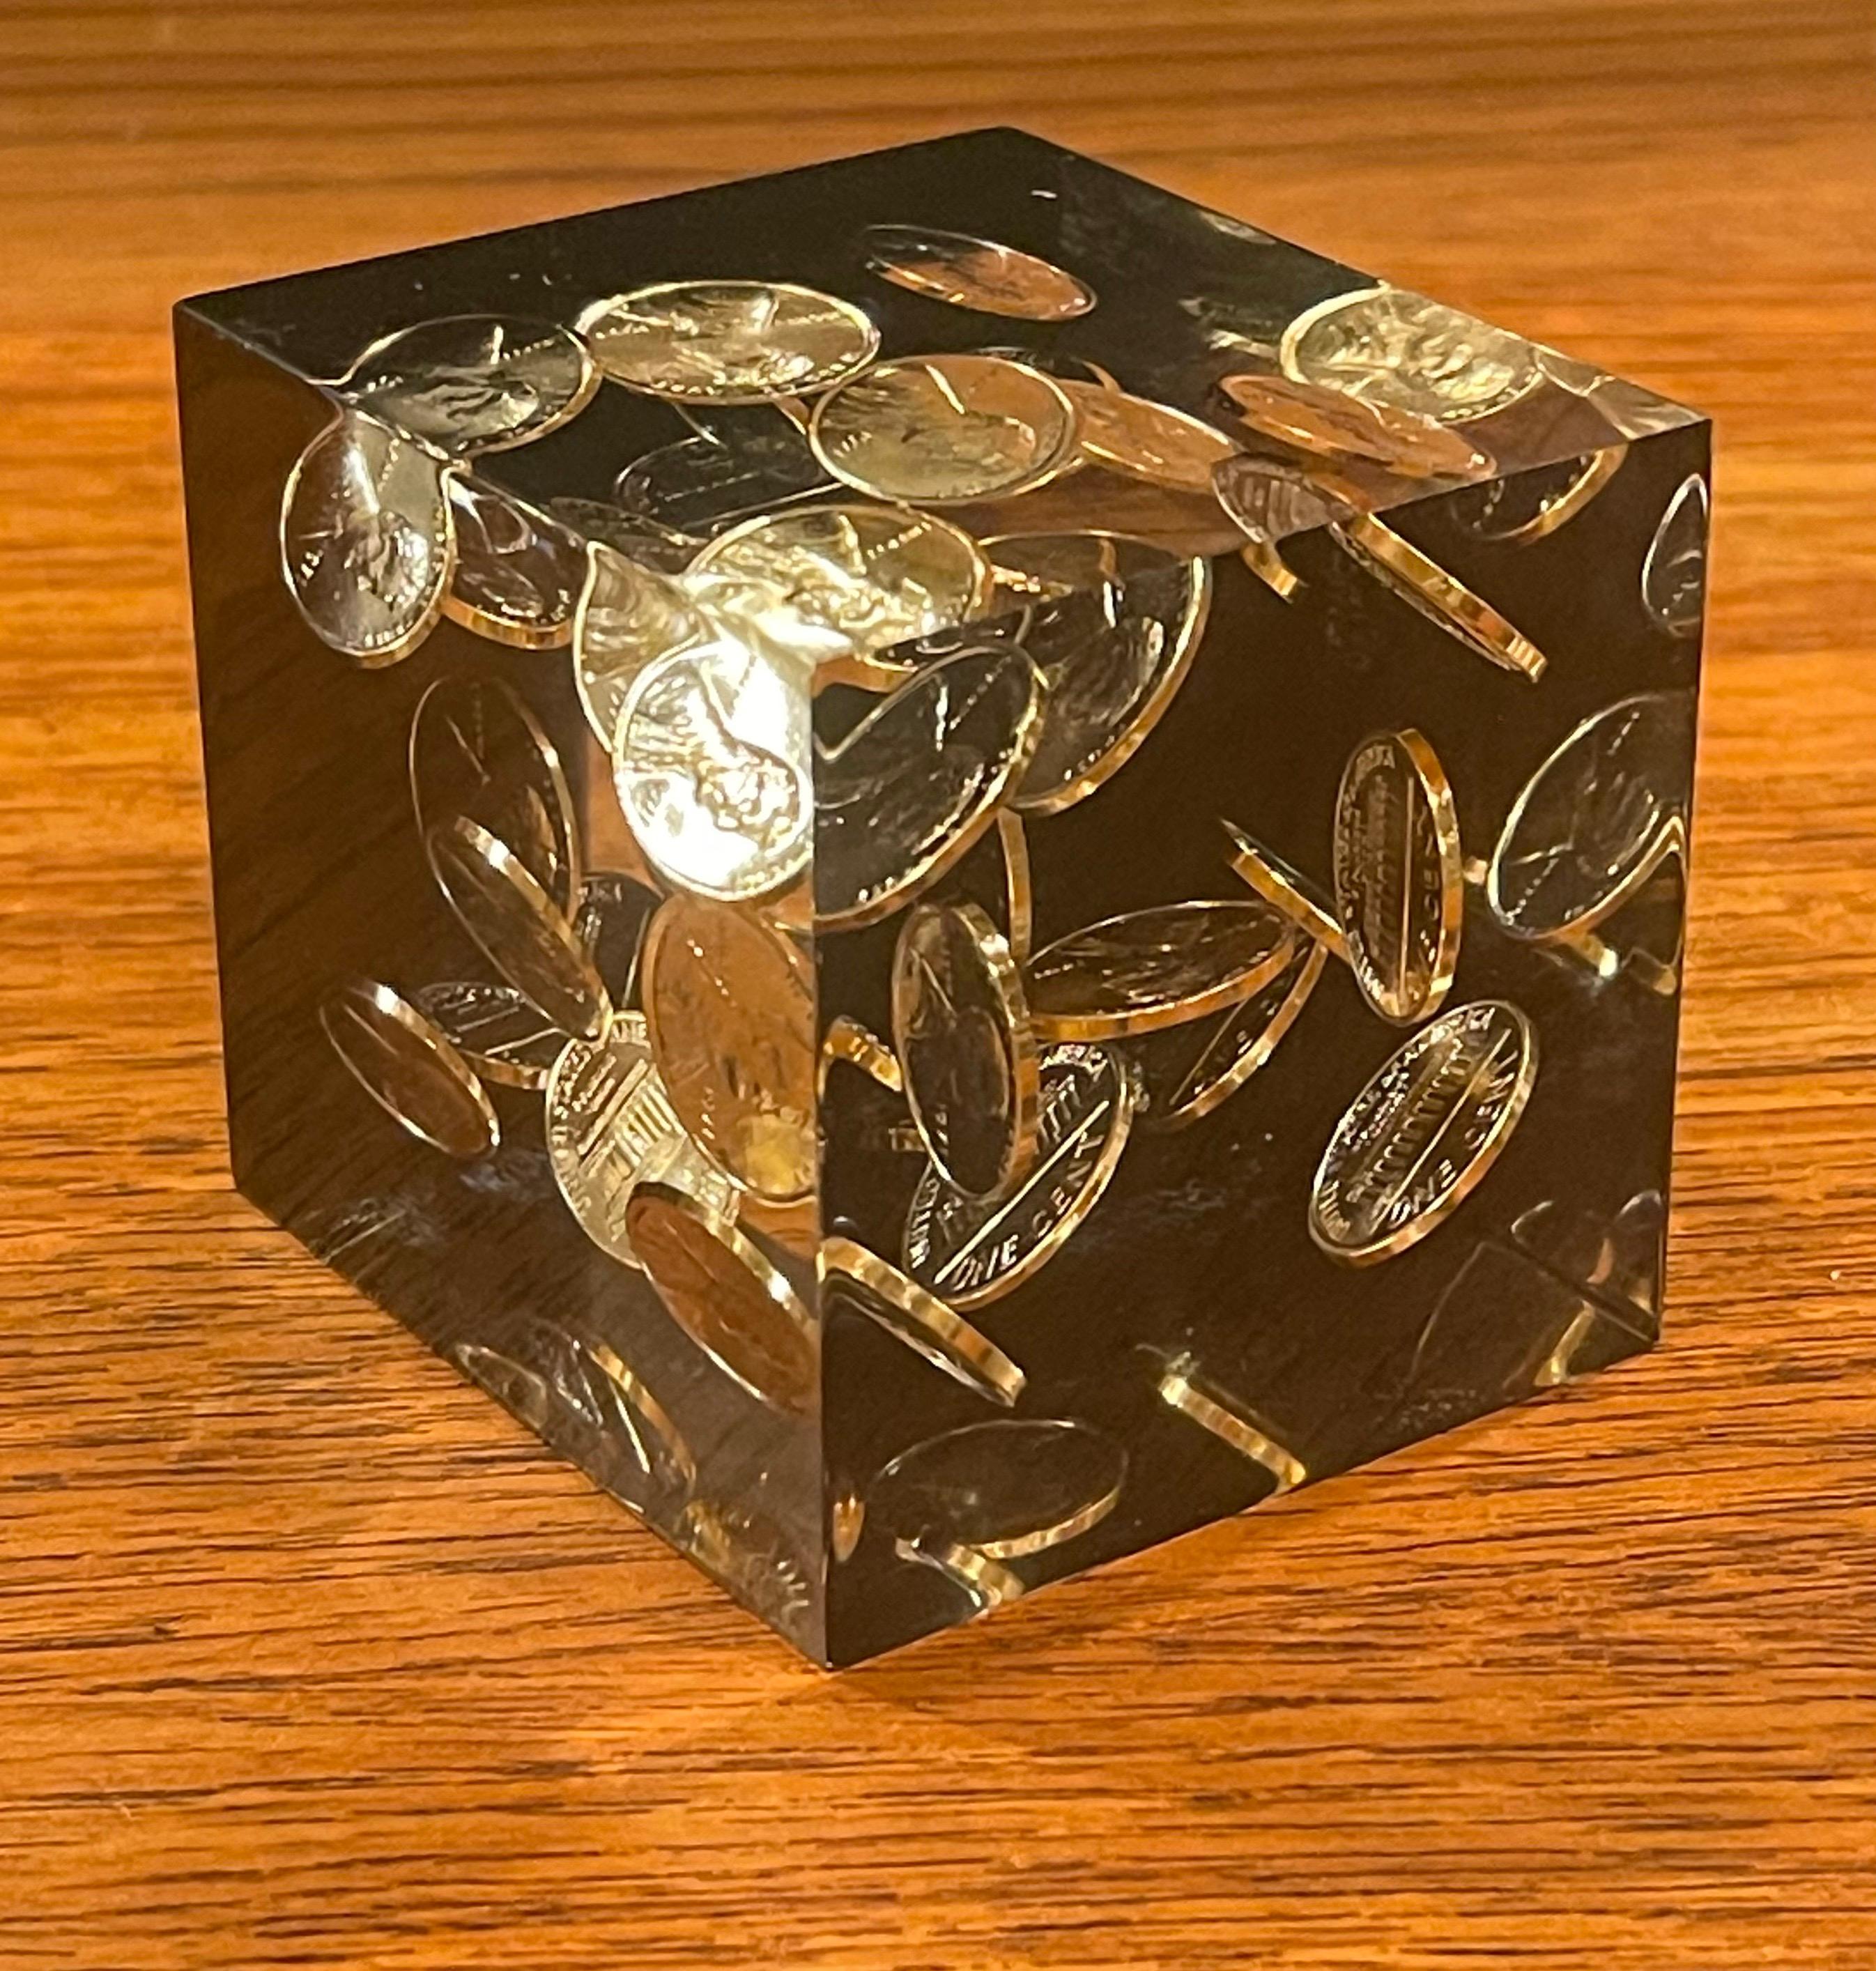 Floating pennies in lucite cube paperweight in the style of William Rolfe, circa 1980s. The pice is in very good vintage condition and measures 2.5